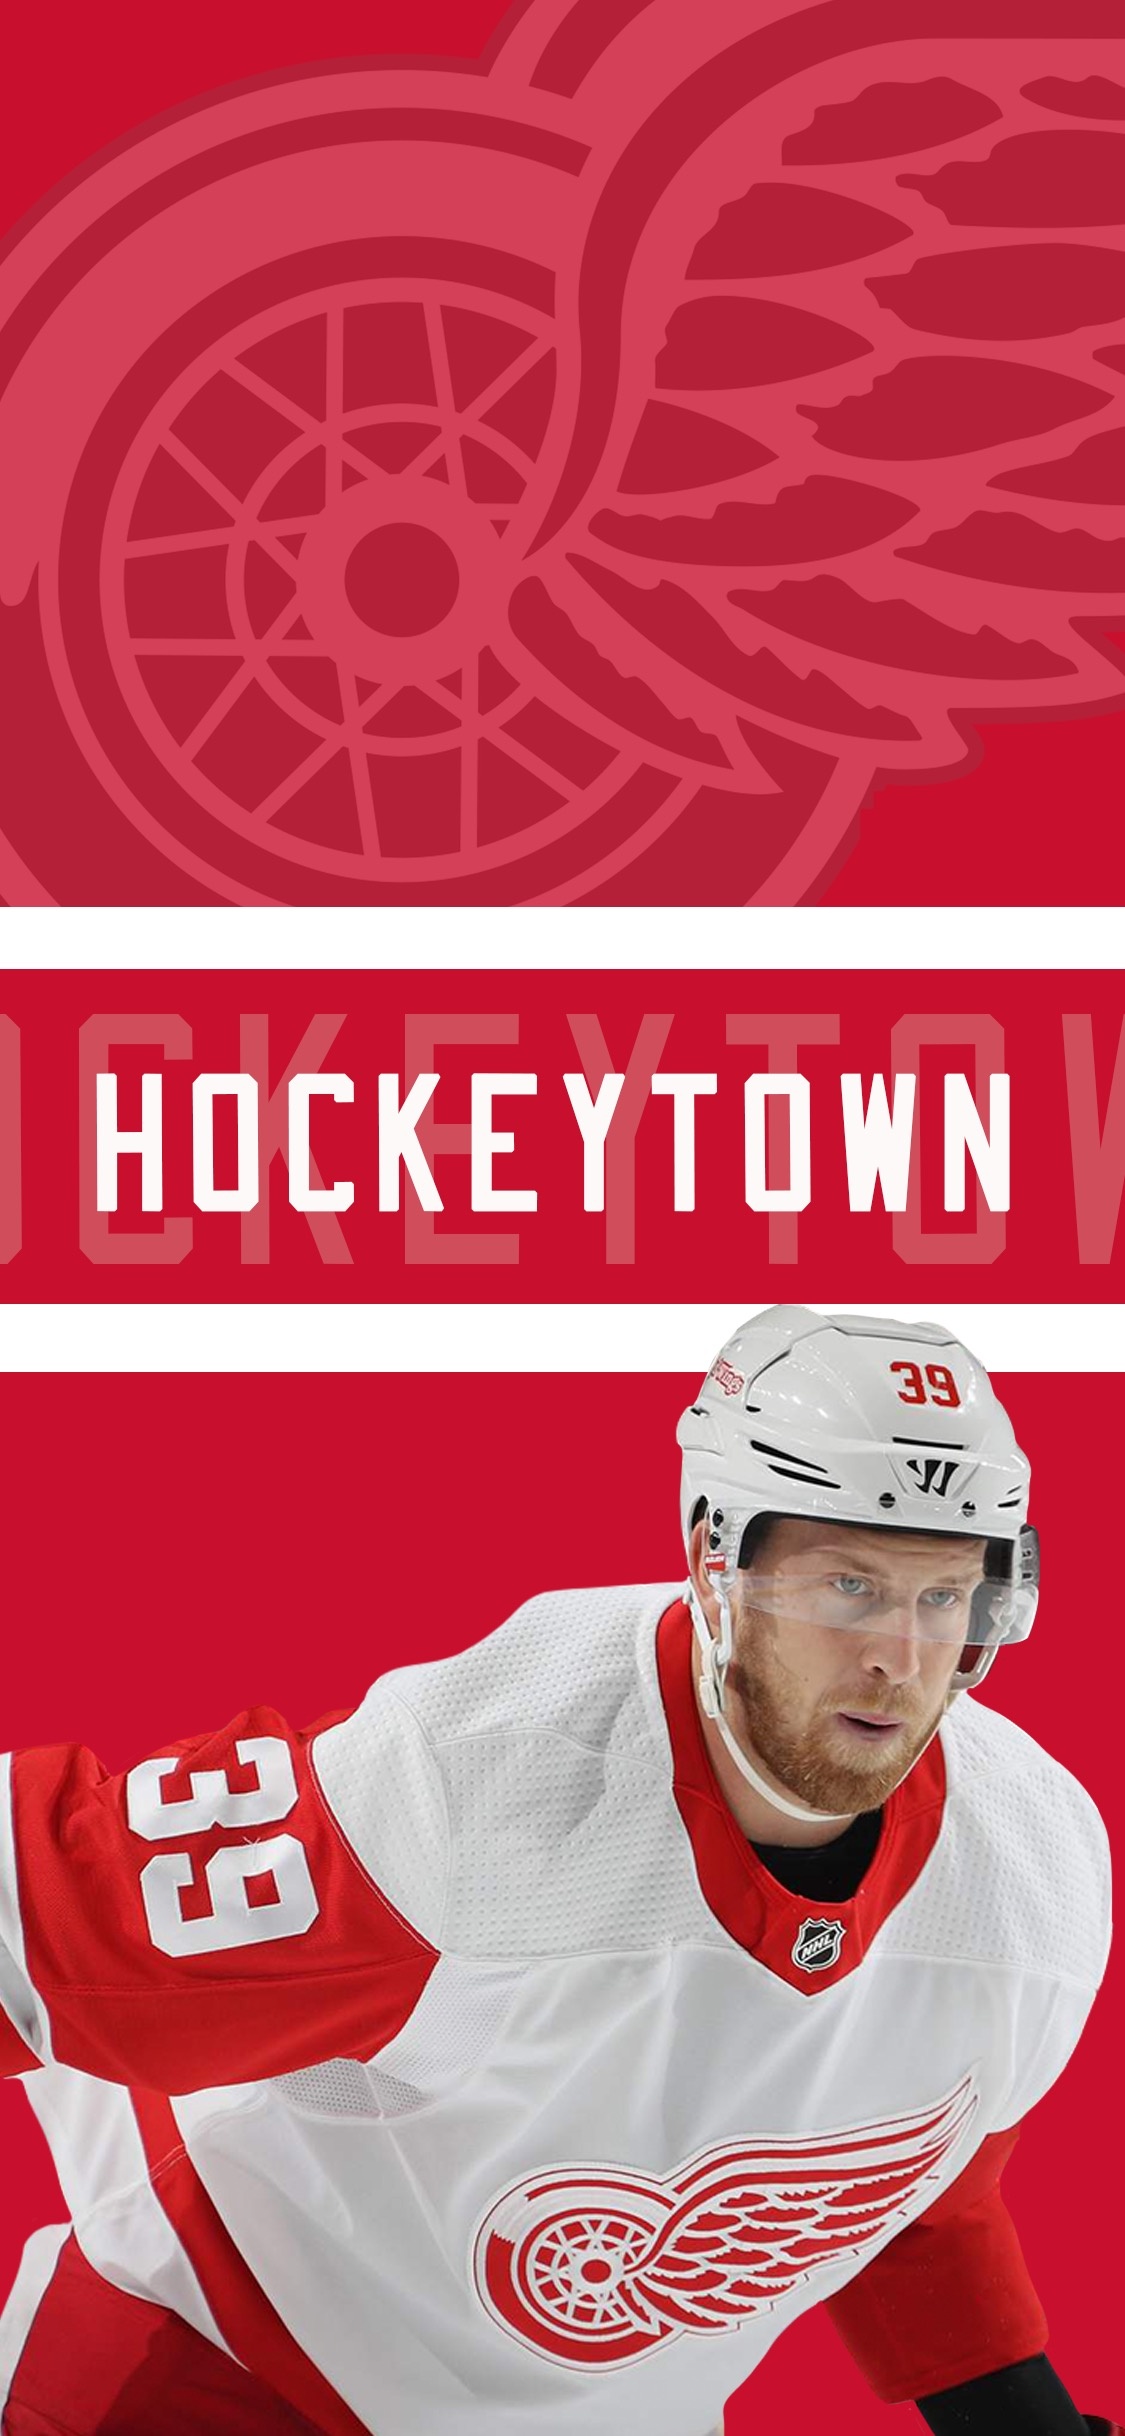 Detroit Red Wings: "Hockeytown" is a registered trademark owned by the franchise since 1996. 1130x2440 HD Background.